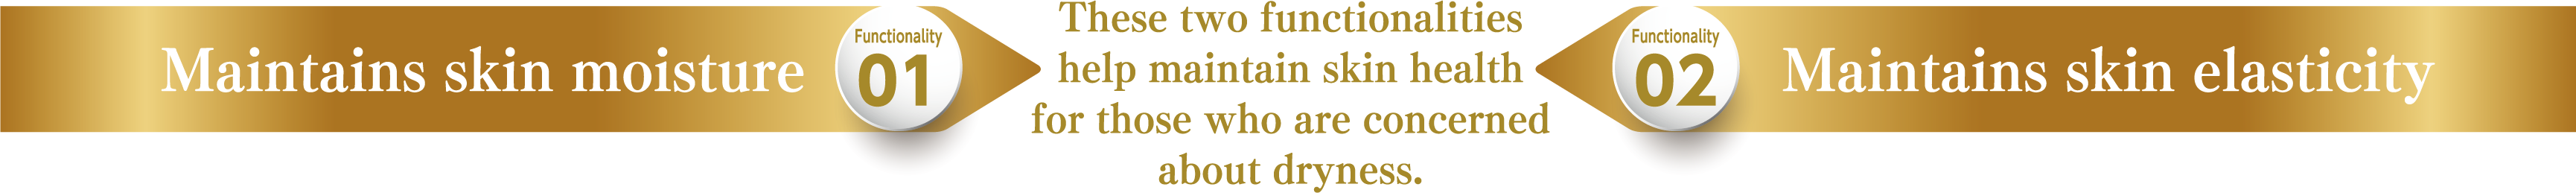 These two functionalities help maintain skin health for those who are concerned about dryness.